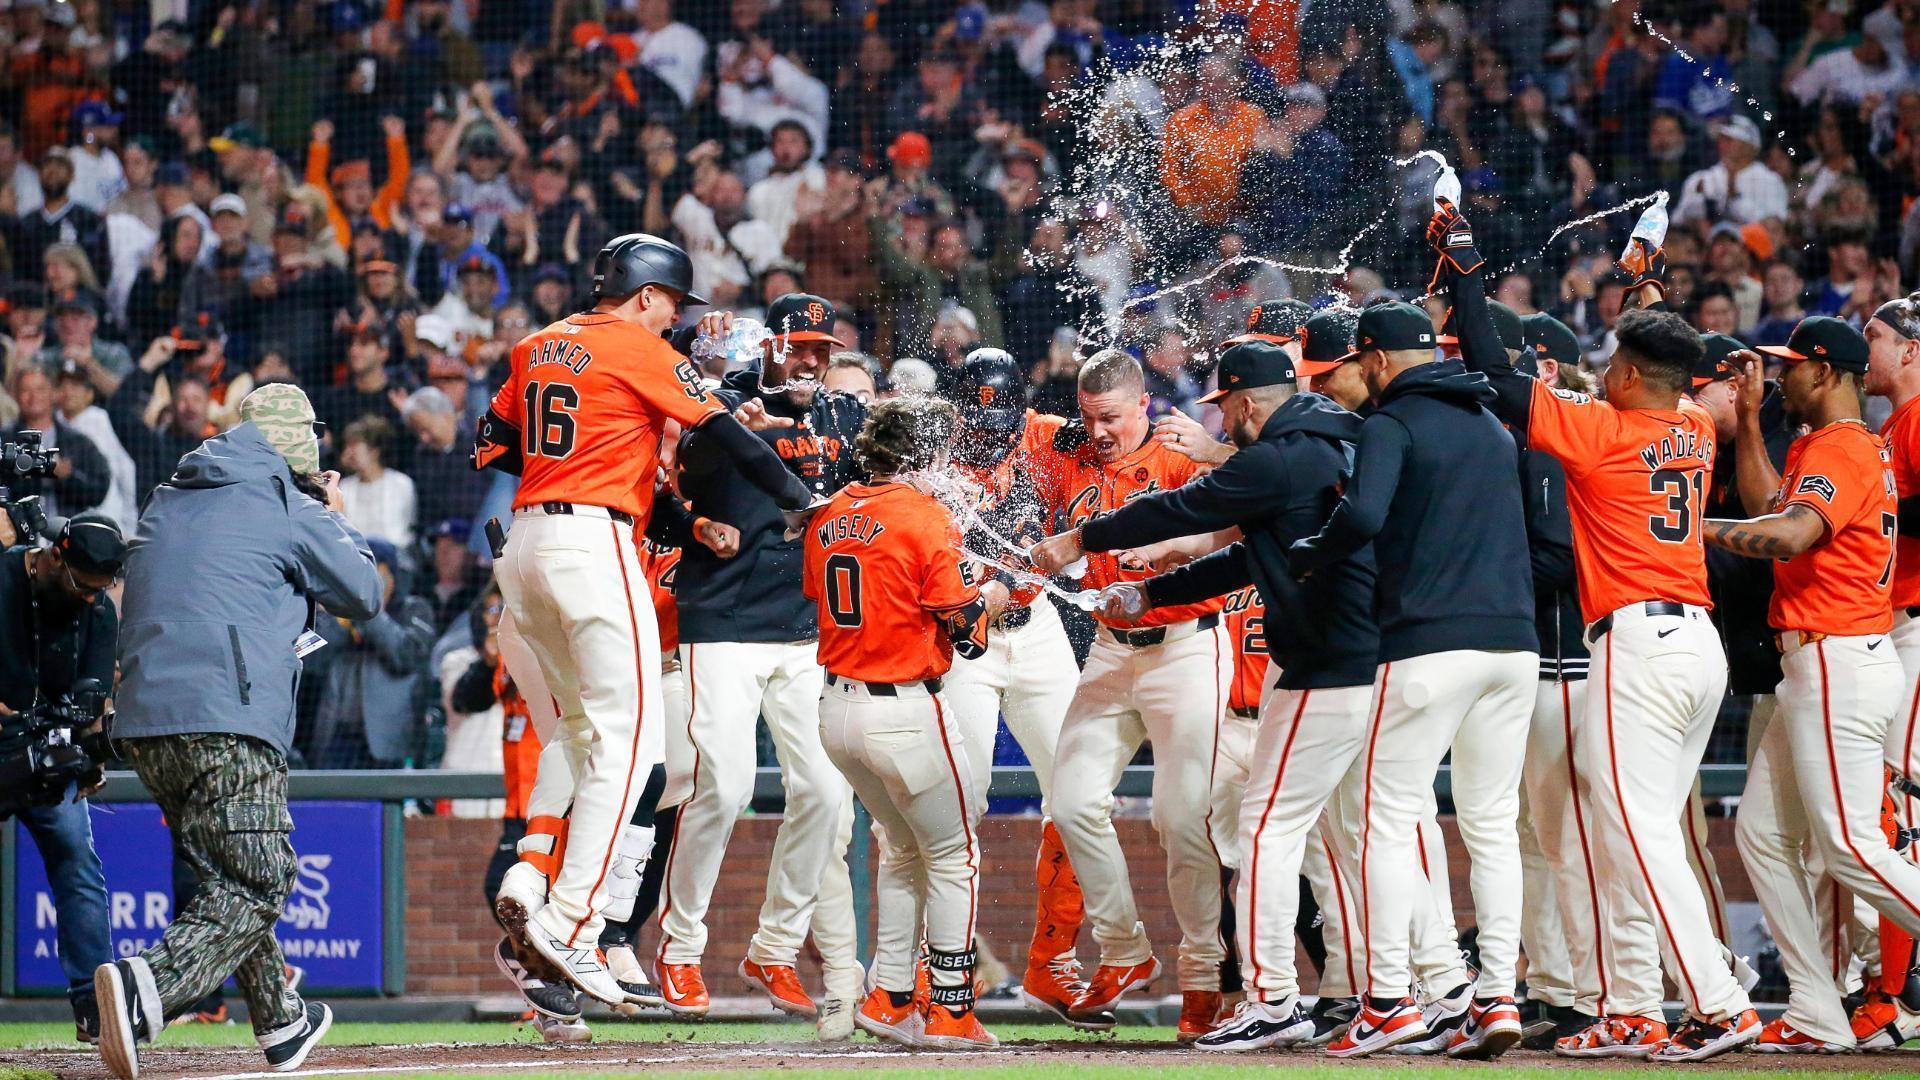 Brett Wisely sends Giants home with walk-off HR into the night